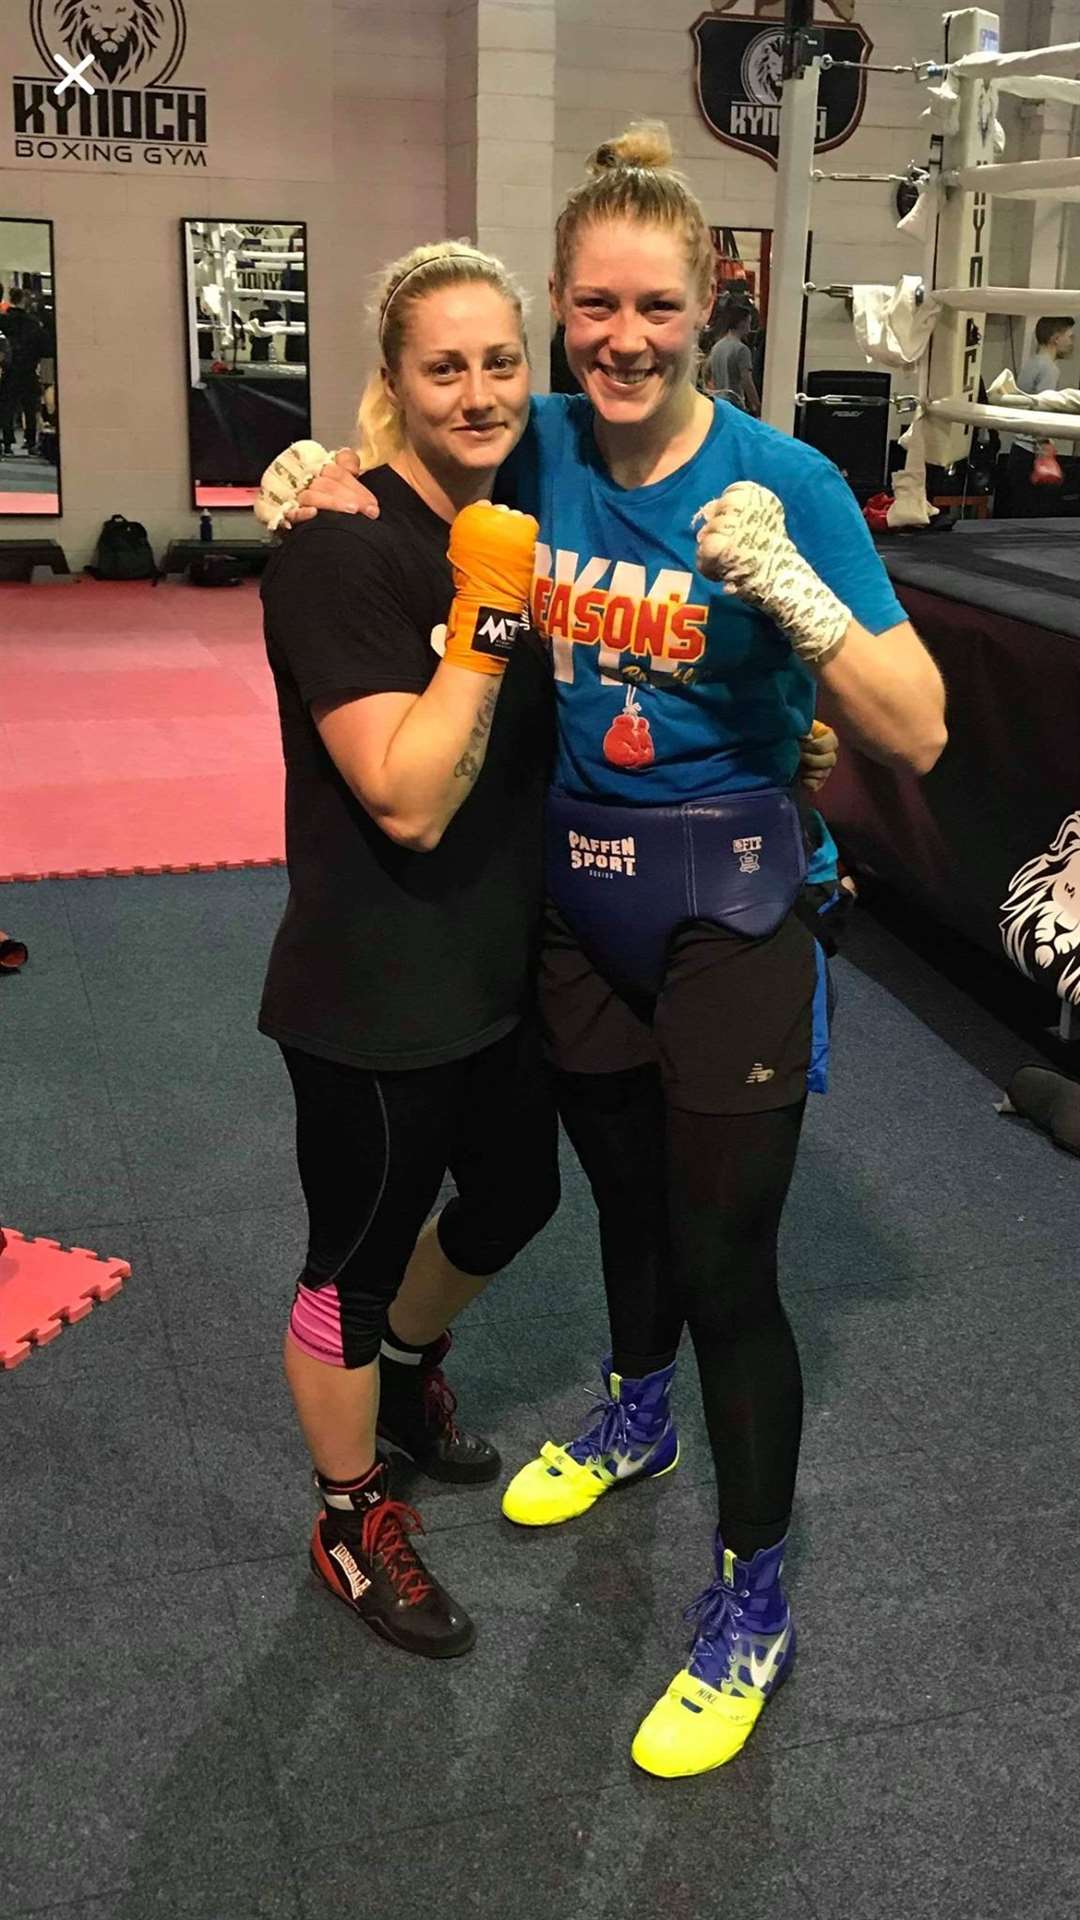 Jacobite Boxing Club member Jemma Cameron (left) was invited to spar with Scotland's first ever female world champion Hannah Rankin.